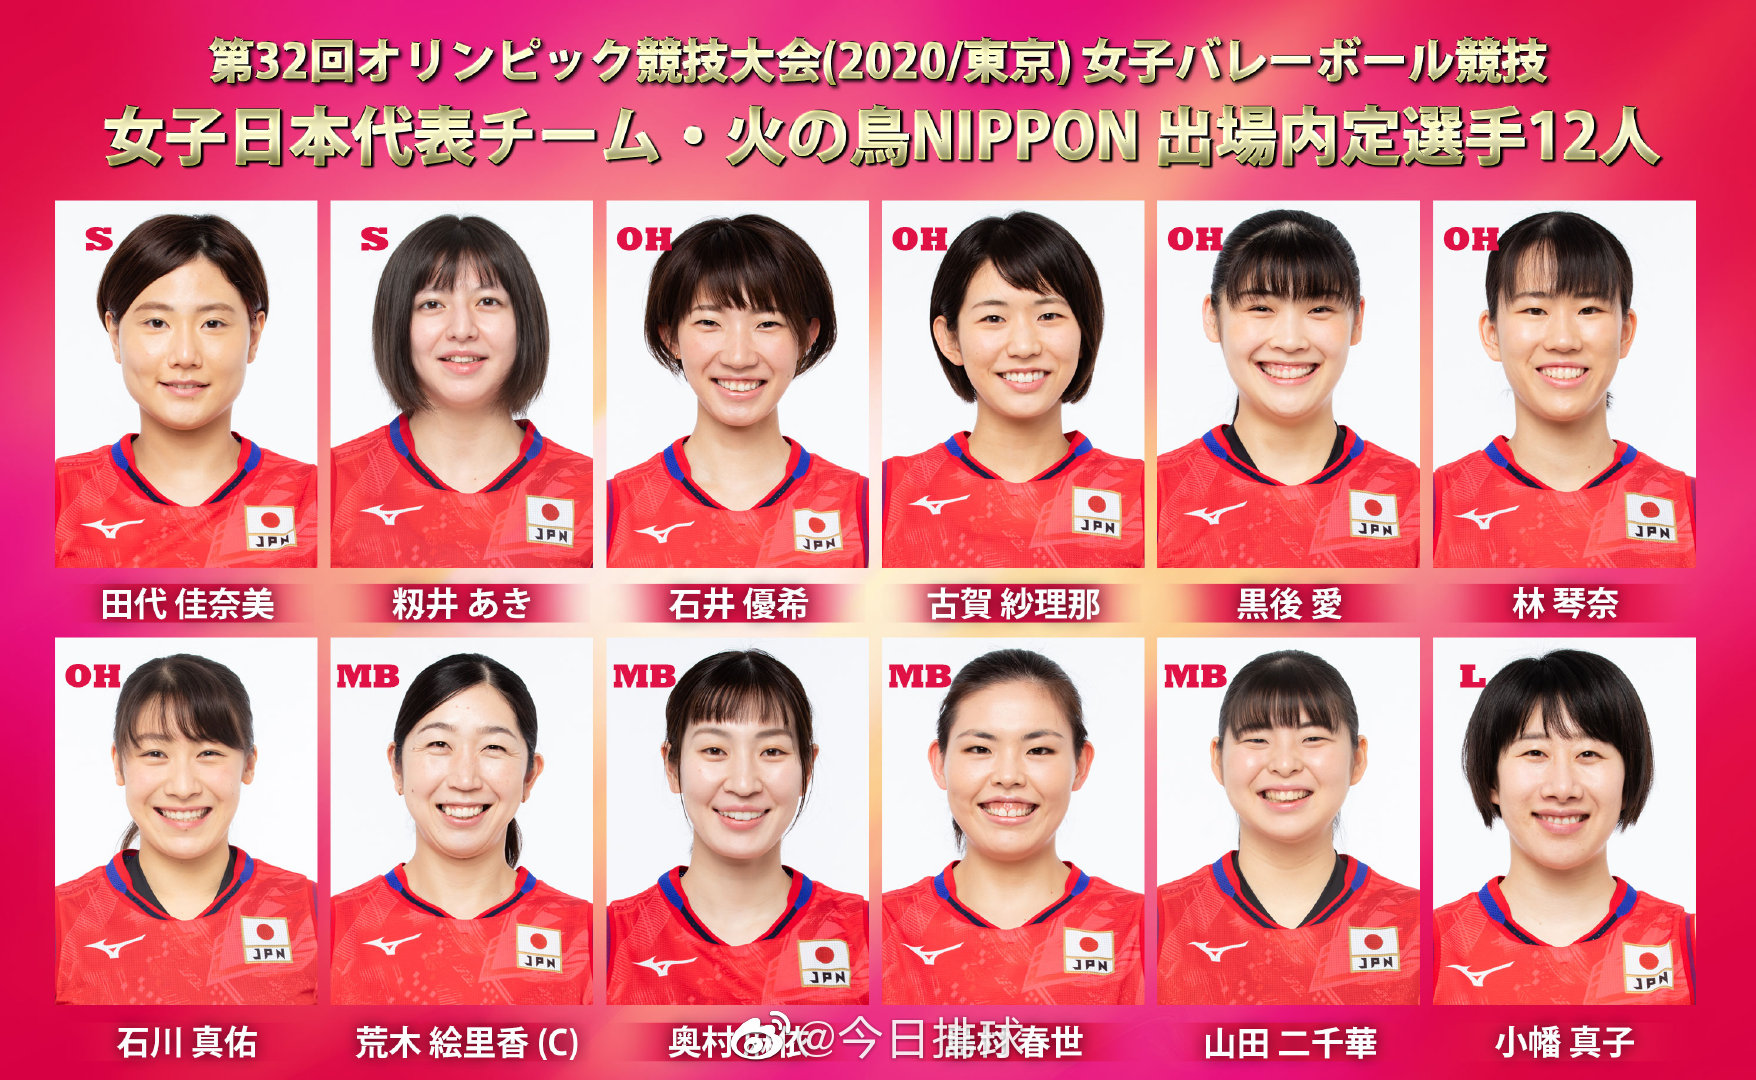 Japanese women's volleyball team's 12member Olympic roster 173cm new